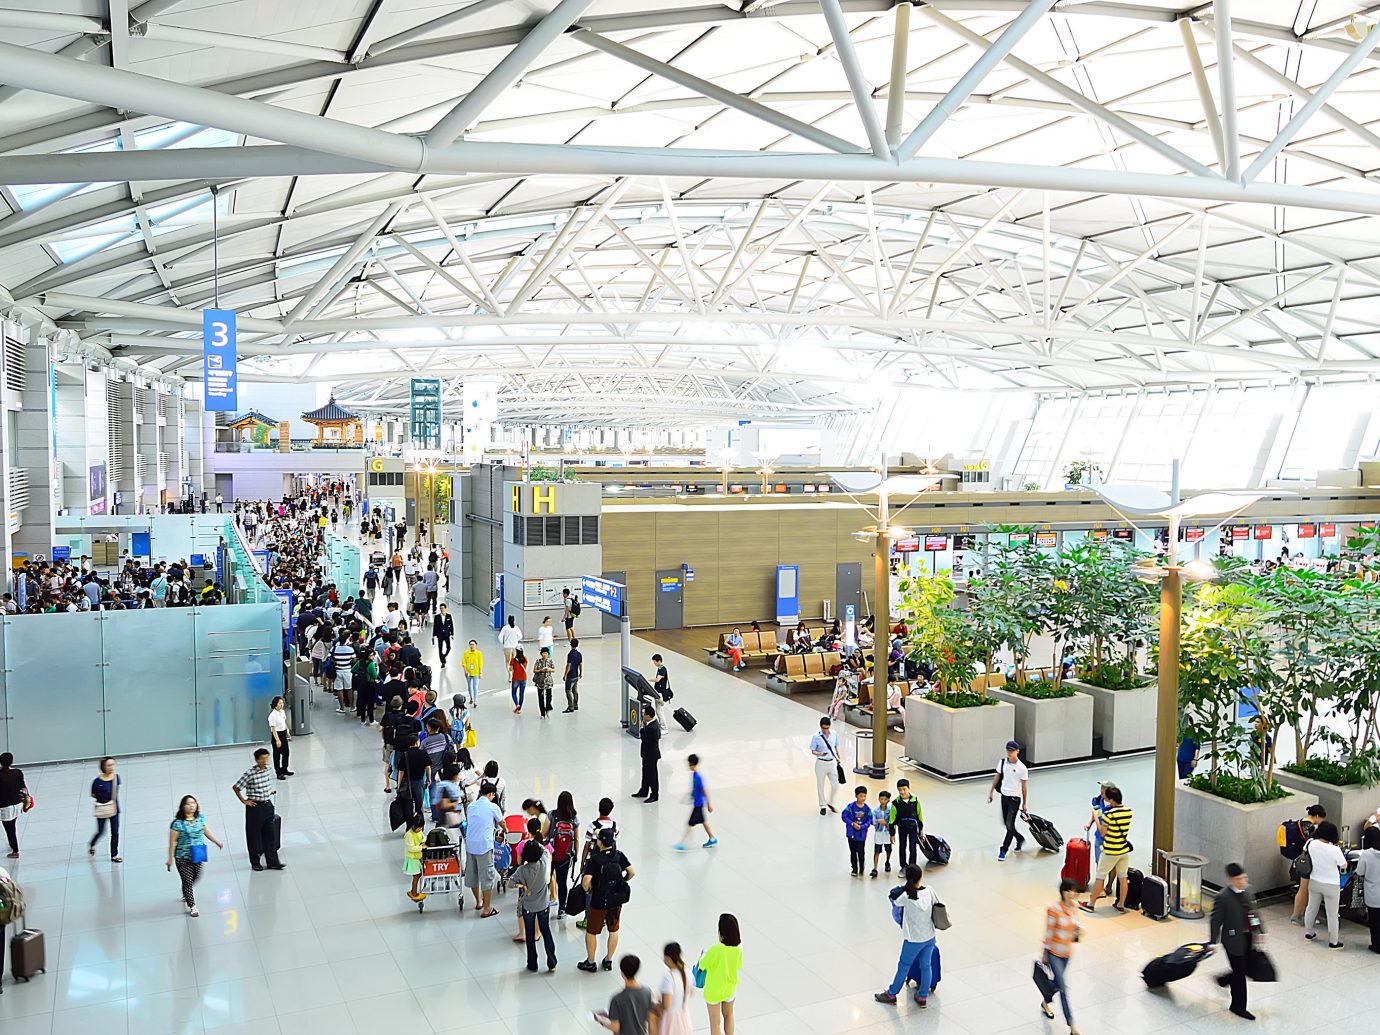 Offbeat Travel Tips indoor ceiling building shopping mall rink airport terminal airport group people ice rink retail public transport area several line